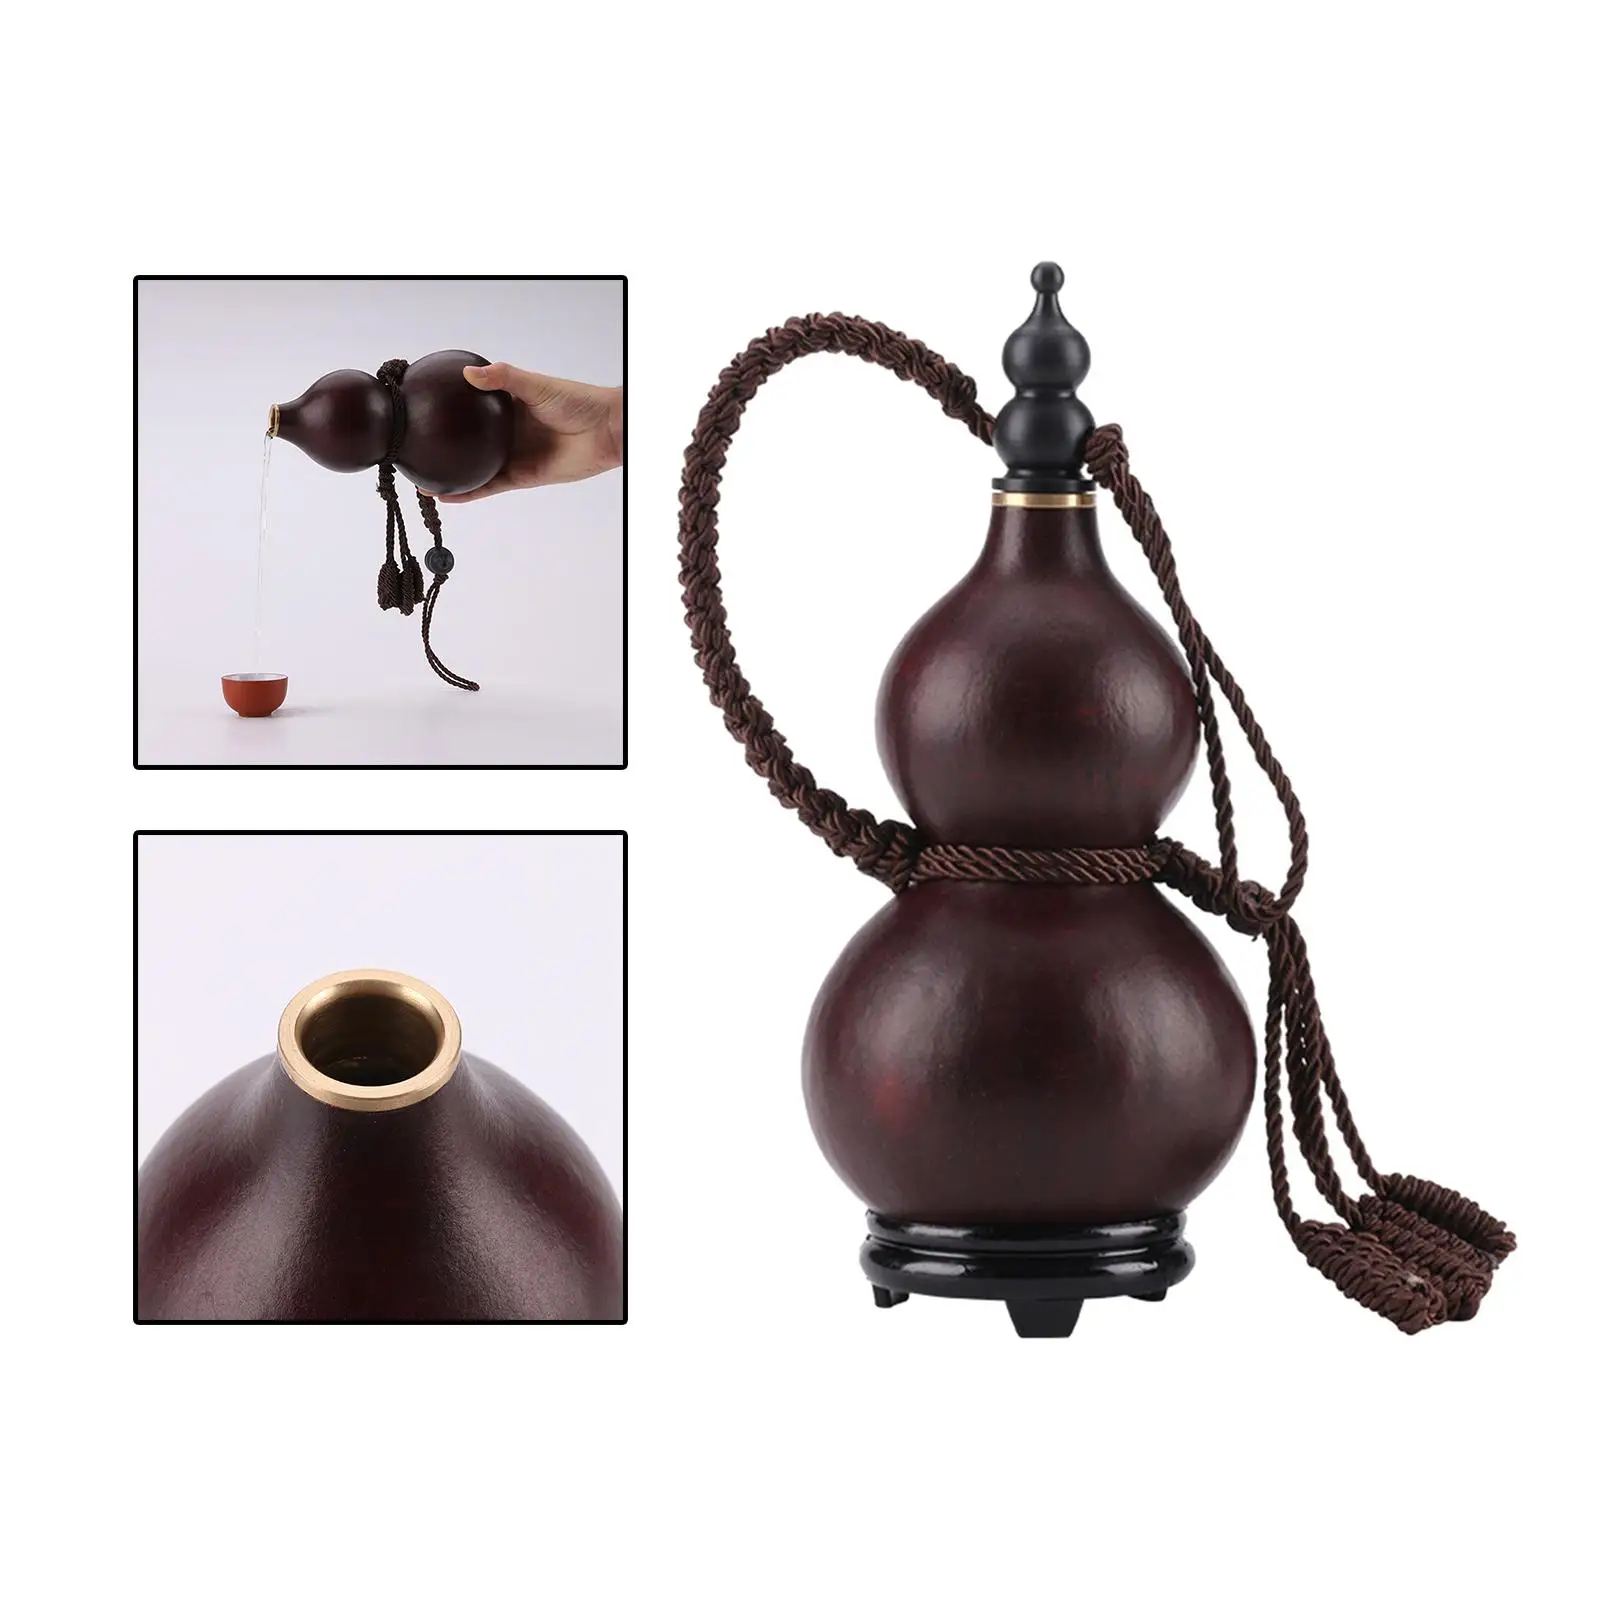 Gourd Water Bottle Beeswax Waterproof Hollow Calabash Wine Gourd Drinking Gourd for Camping Interior Drinks Holder Home Ornament